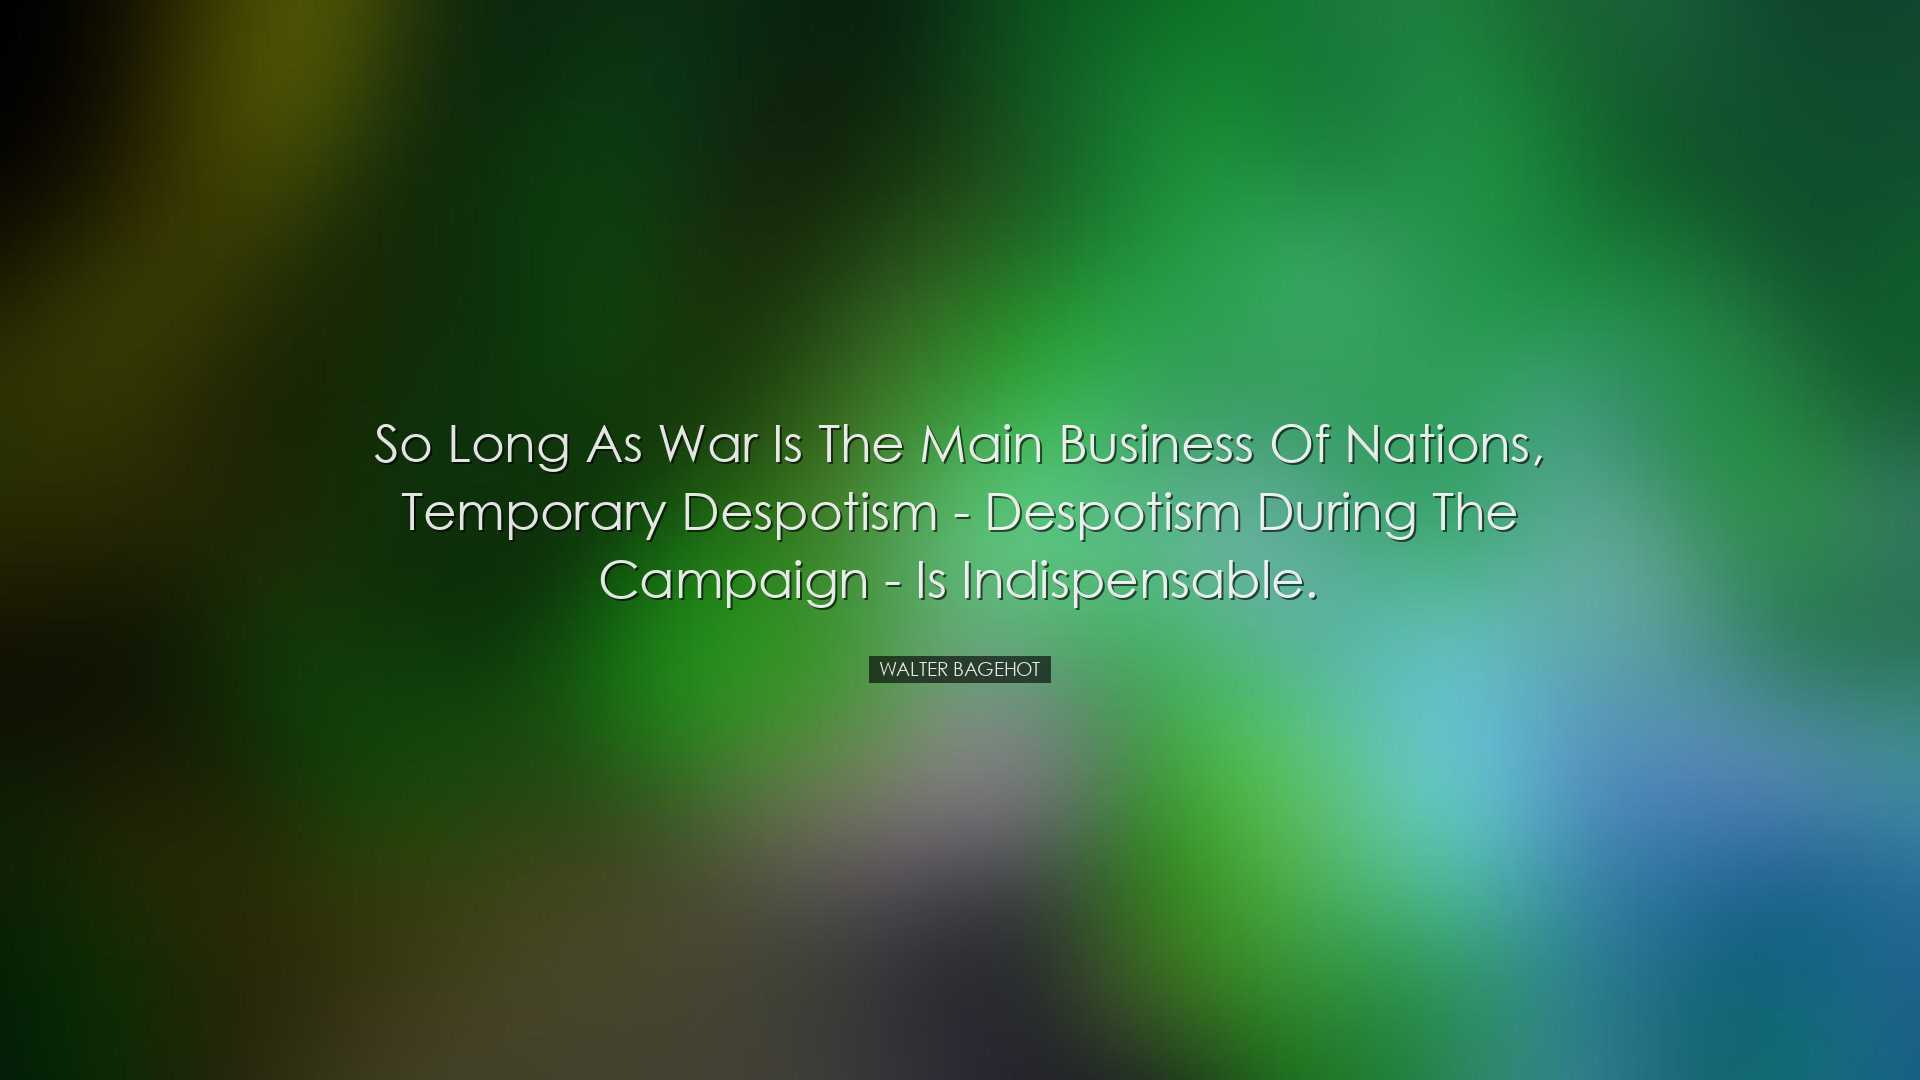 So long as war is the main business of nations, temporary despotis